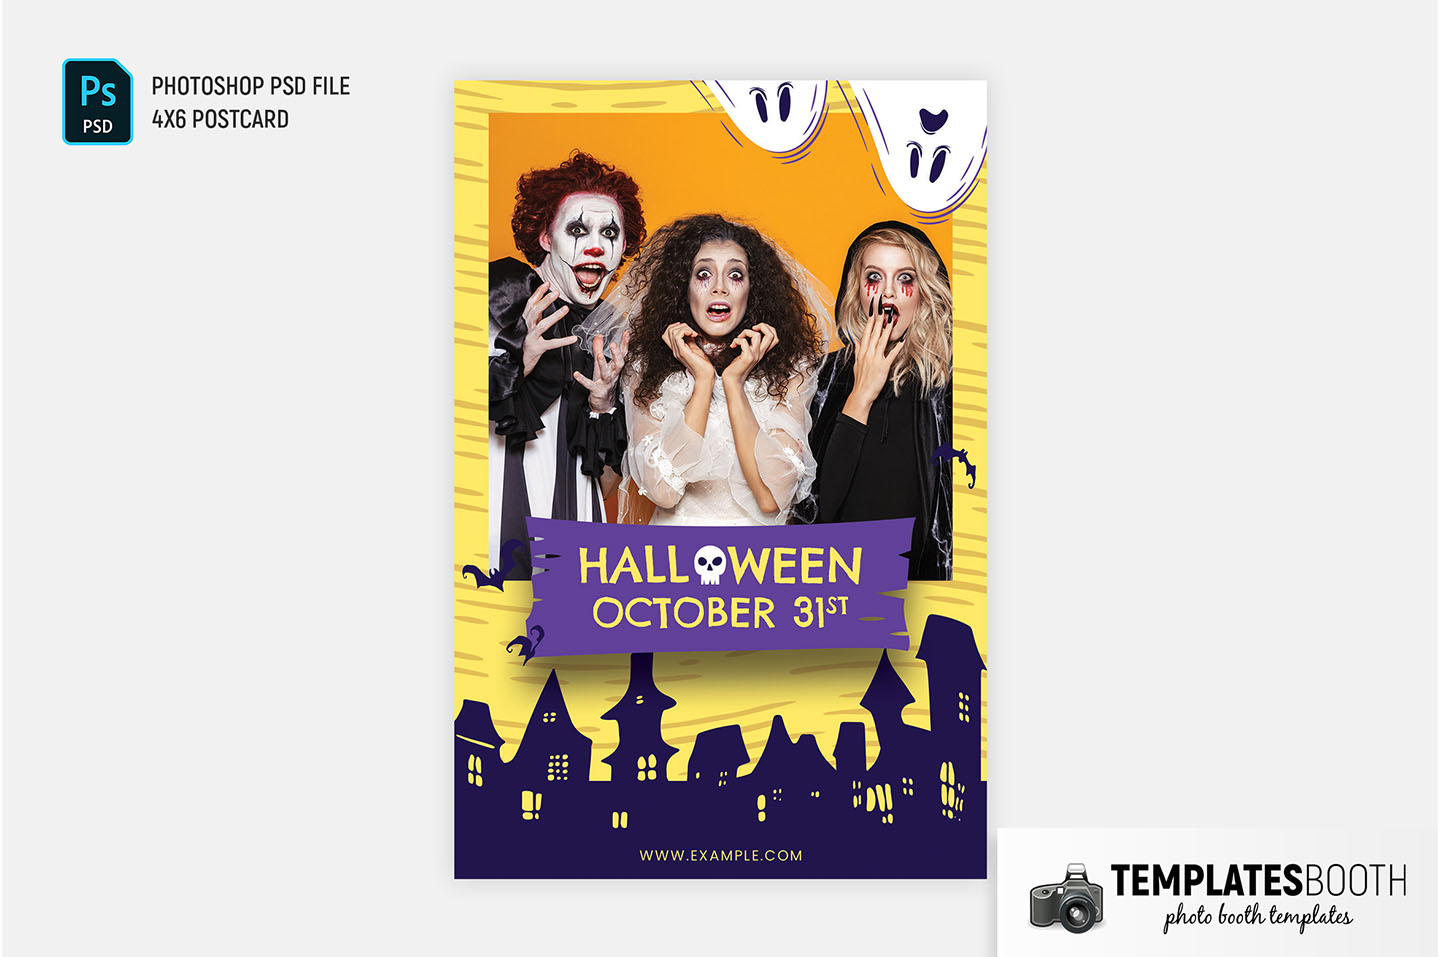 Halloween Photo Booth Template (PSD, PNG & DSLR Booth)